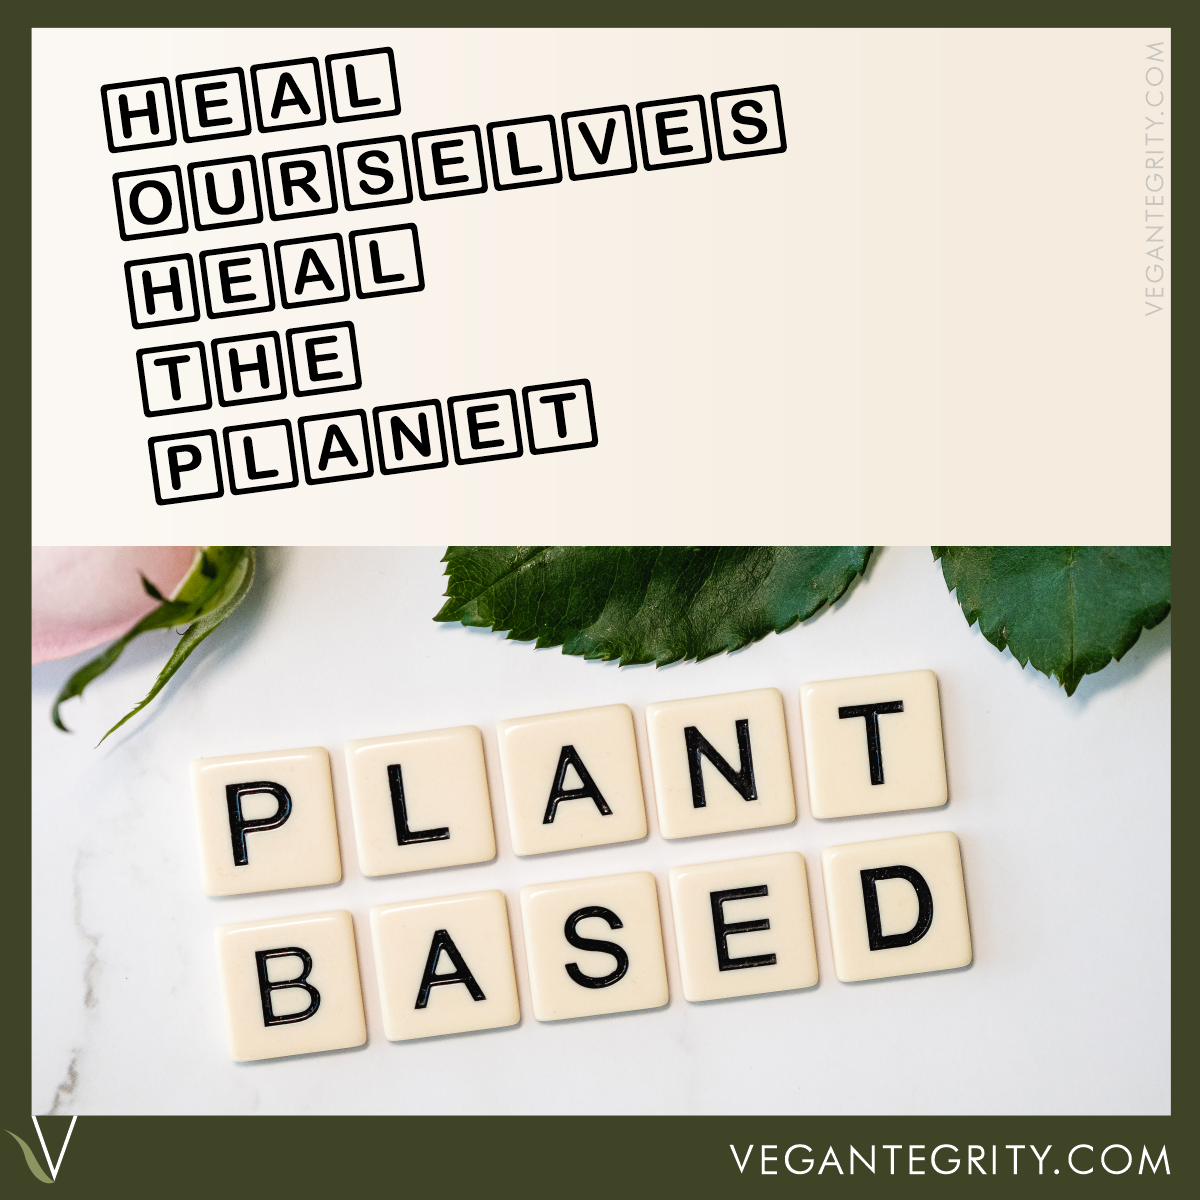 Get with the game. We can heal ourselves and heal the planet. Green leaves and beige Scrabble tiles spelling out PLANT BASED on white background